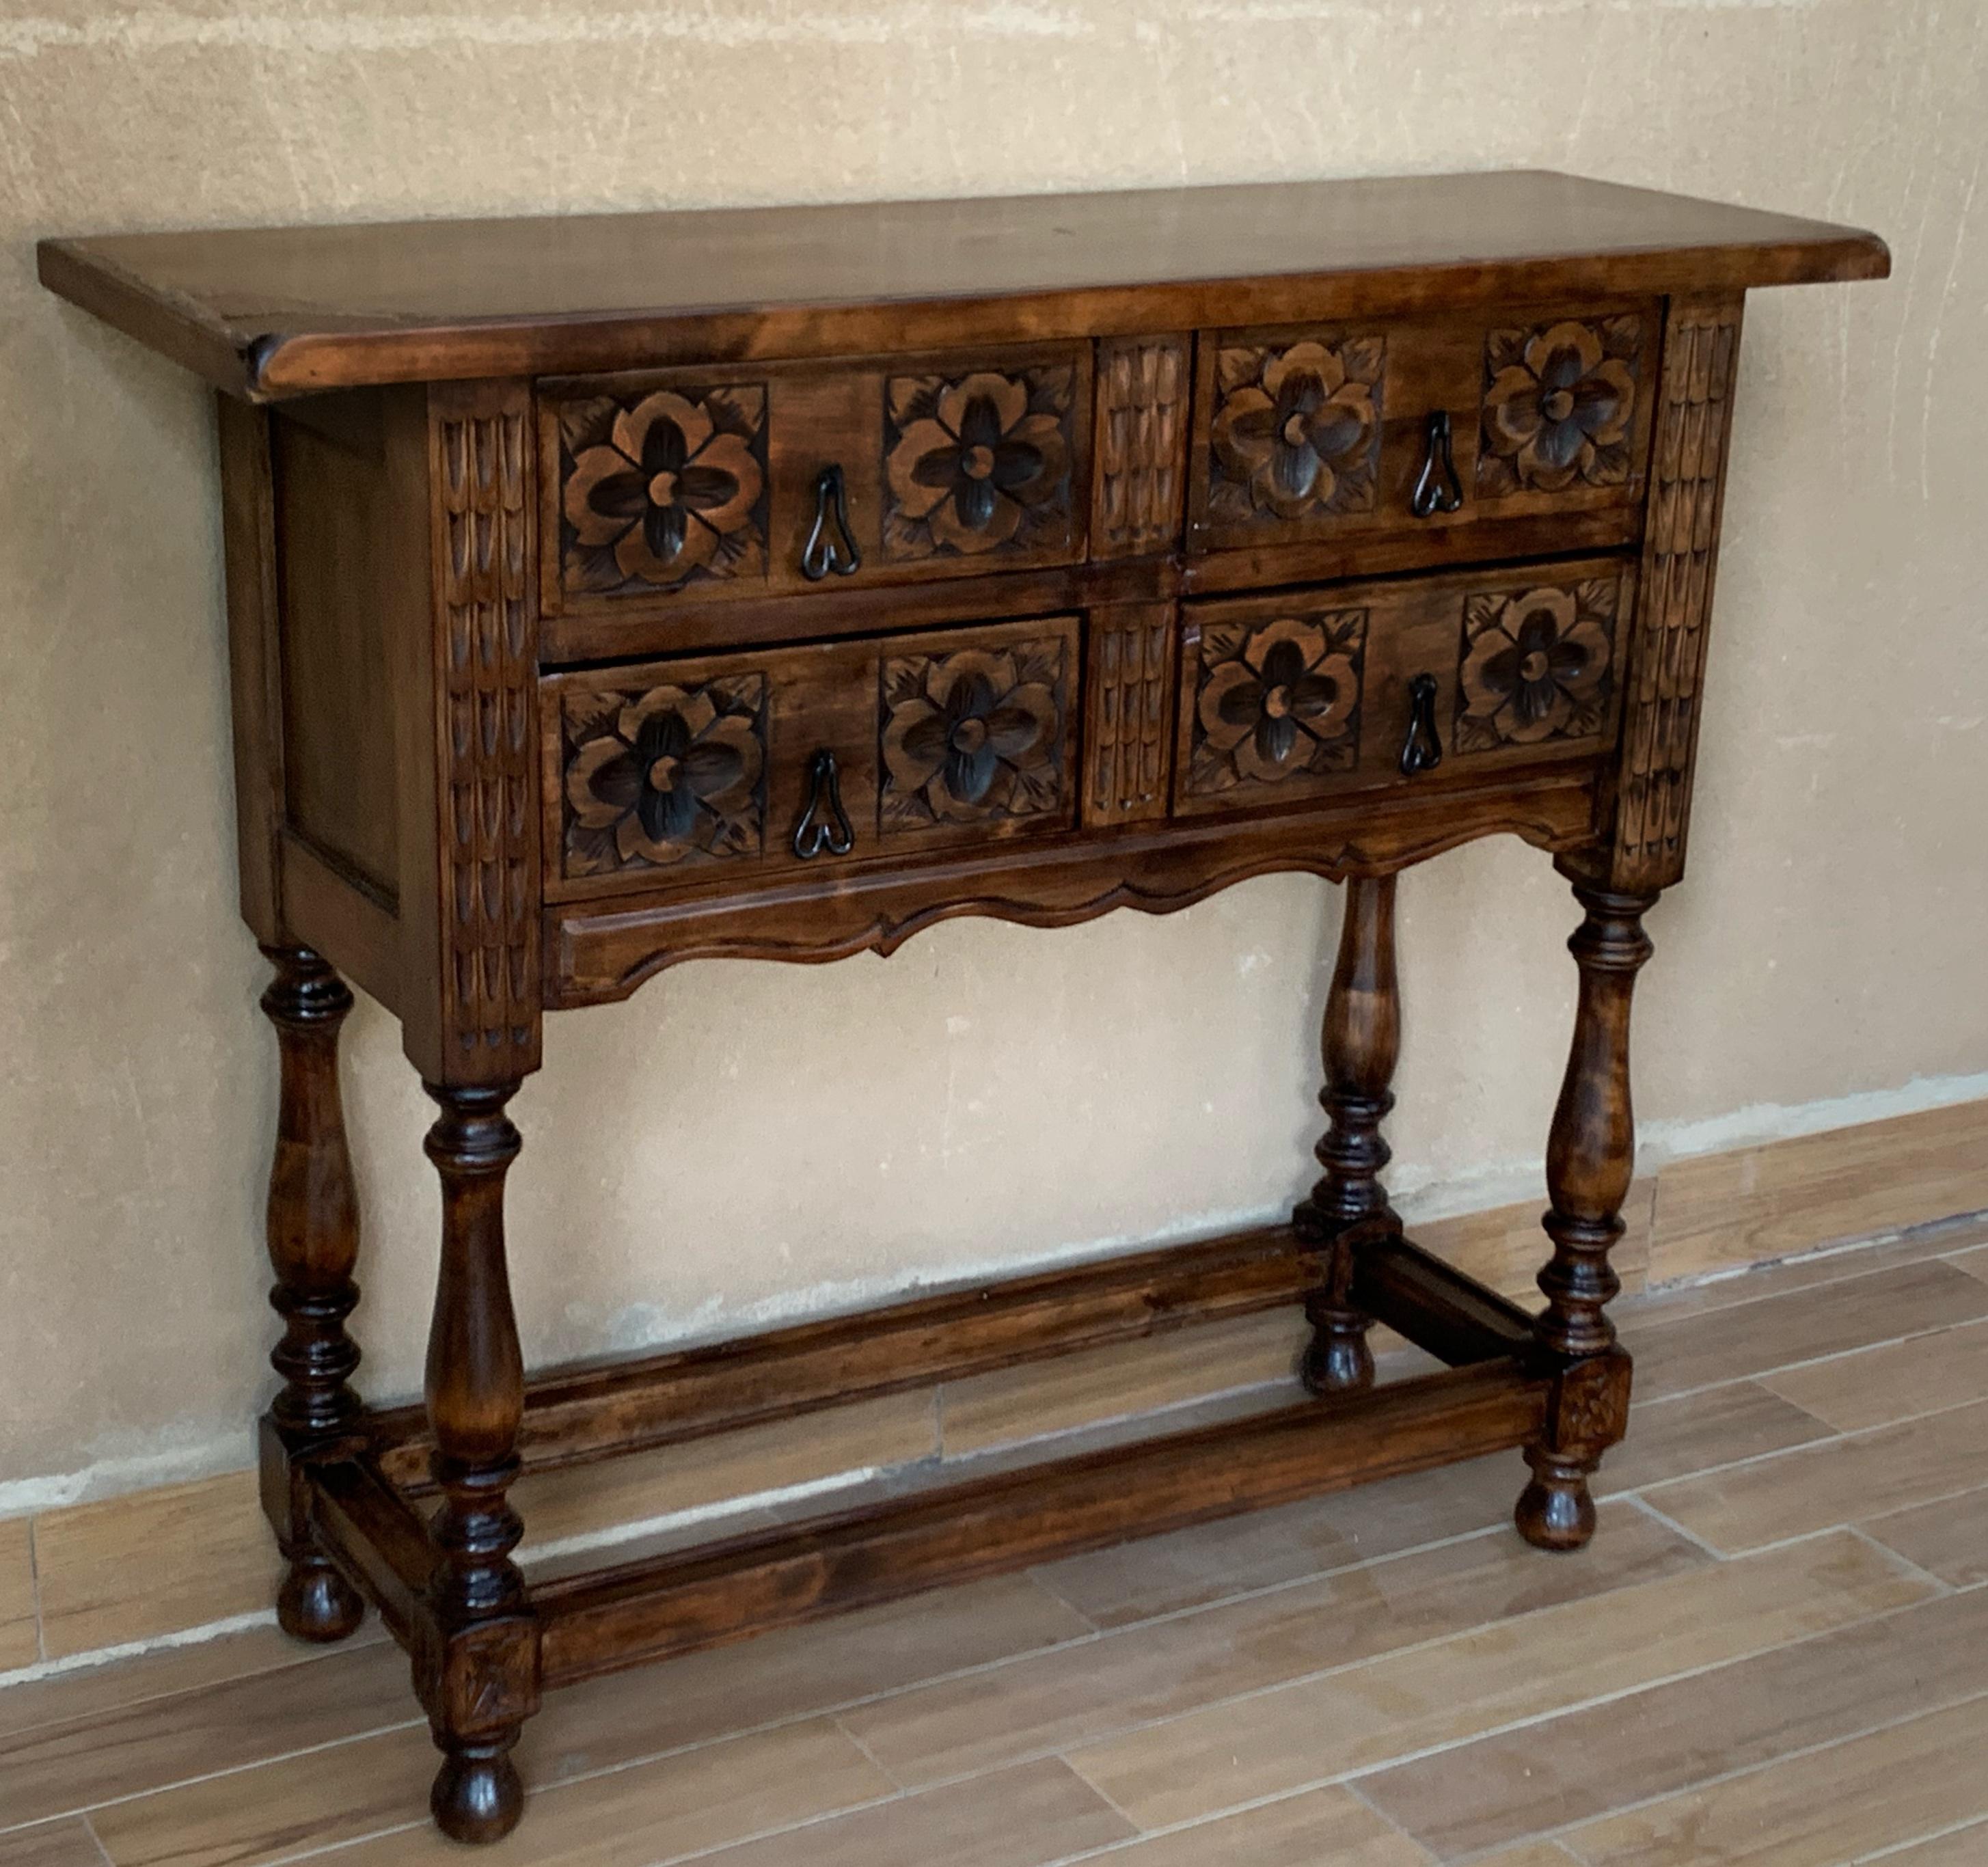 19th century Spanish antique pine walnut console sofa table with the four drawers and original iron hardware.
You can use like a commode or chest of drawers
This elegant console was crafted in Spain, circa 1890. The sofa table with four legs